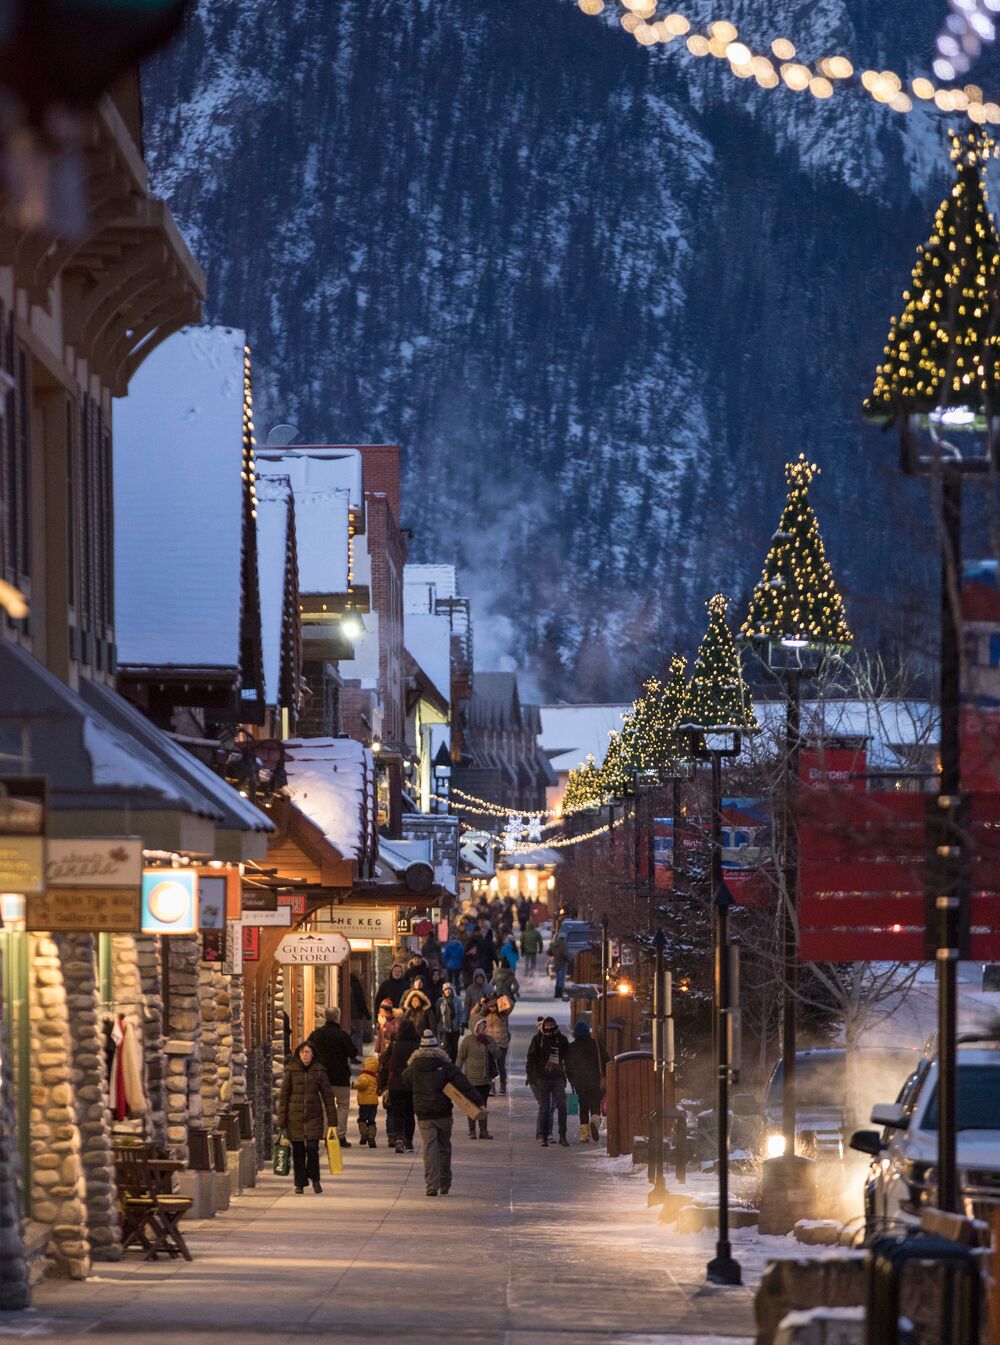 Banff Avenue in the Banff Townsite in Banff National Park in the winter during the holiday season.